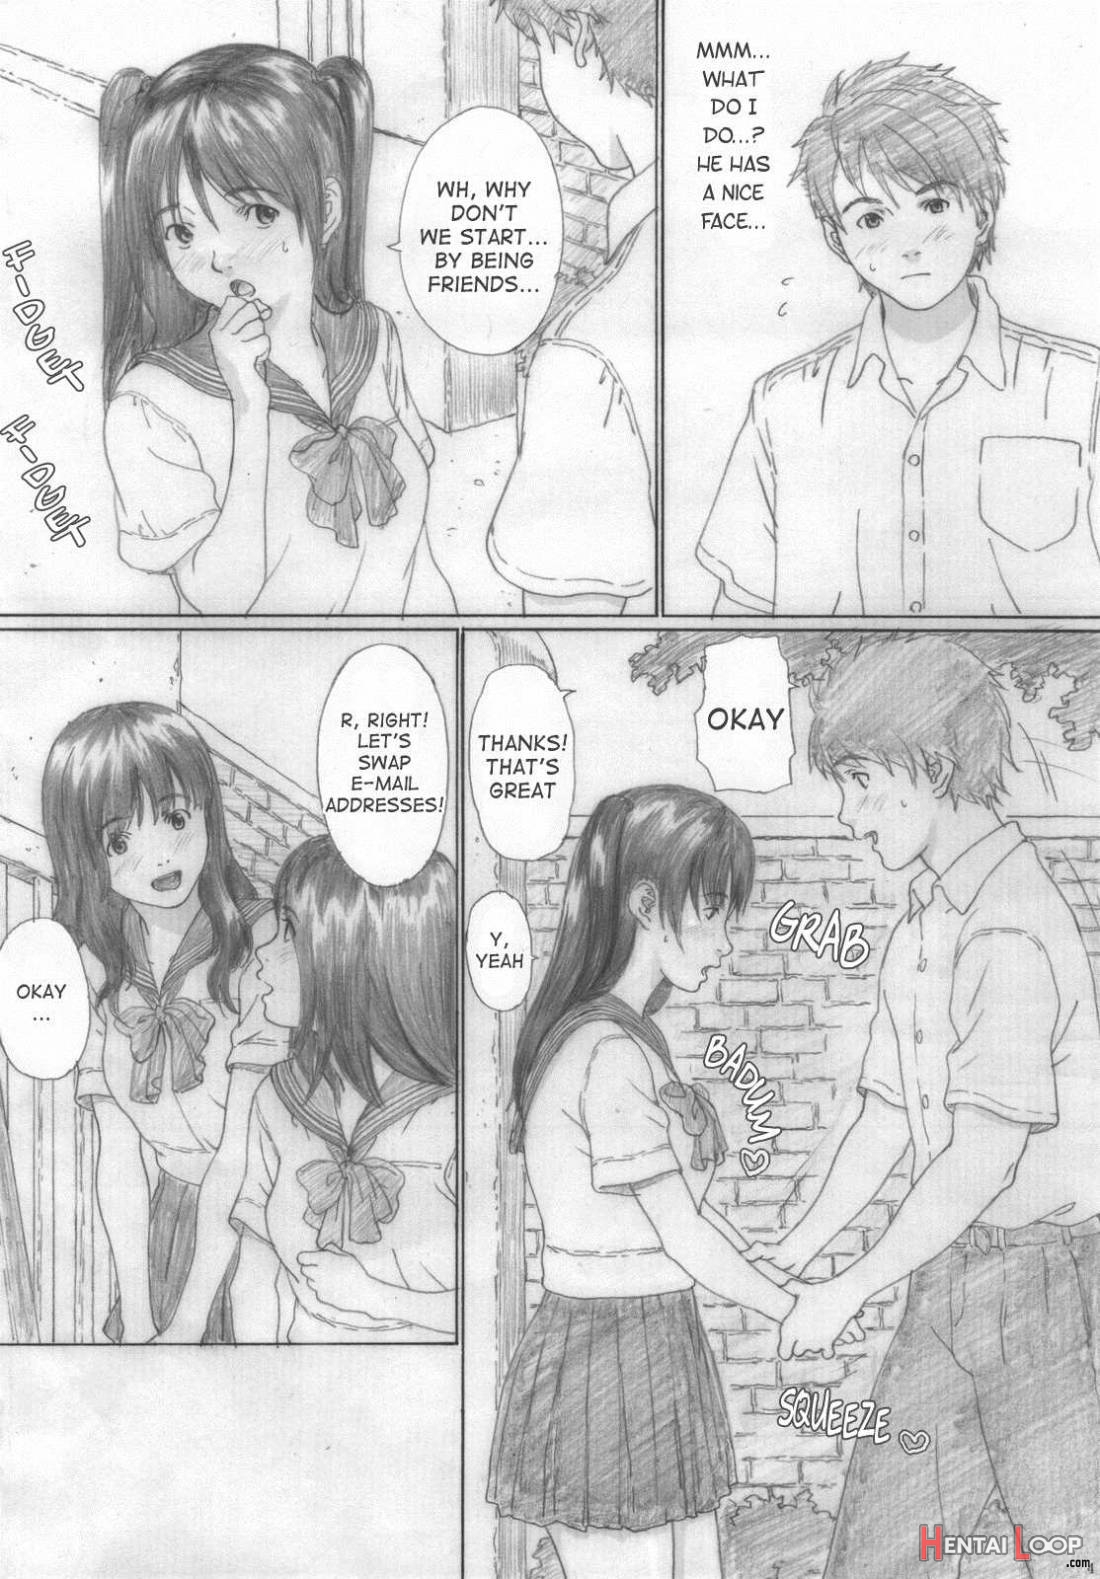 Peach Girl 2 page 4